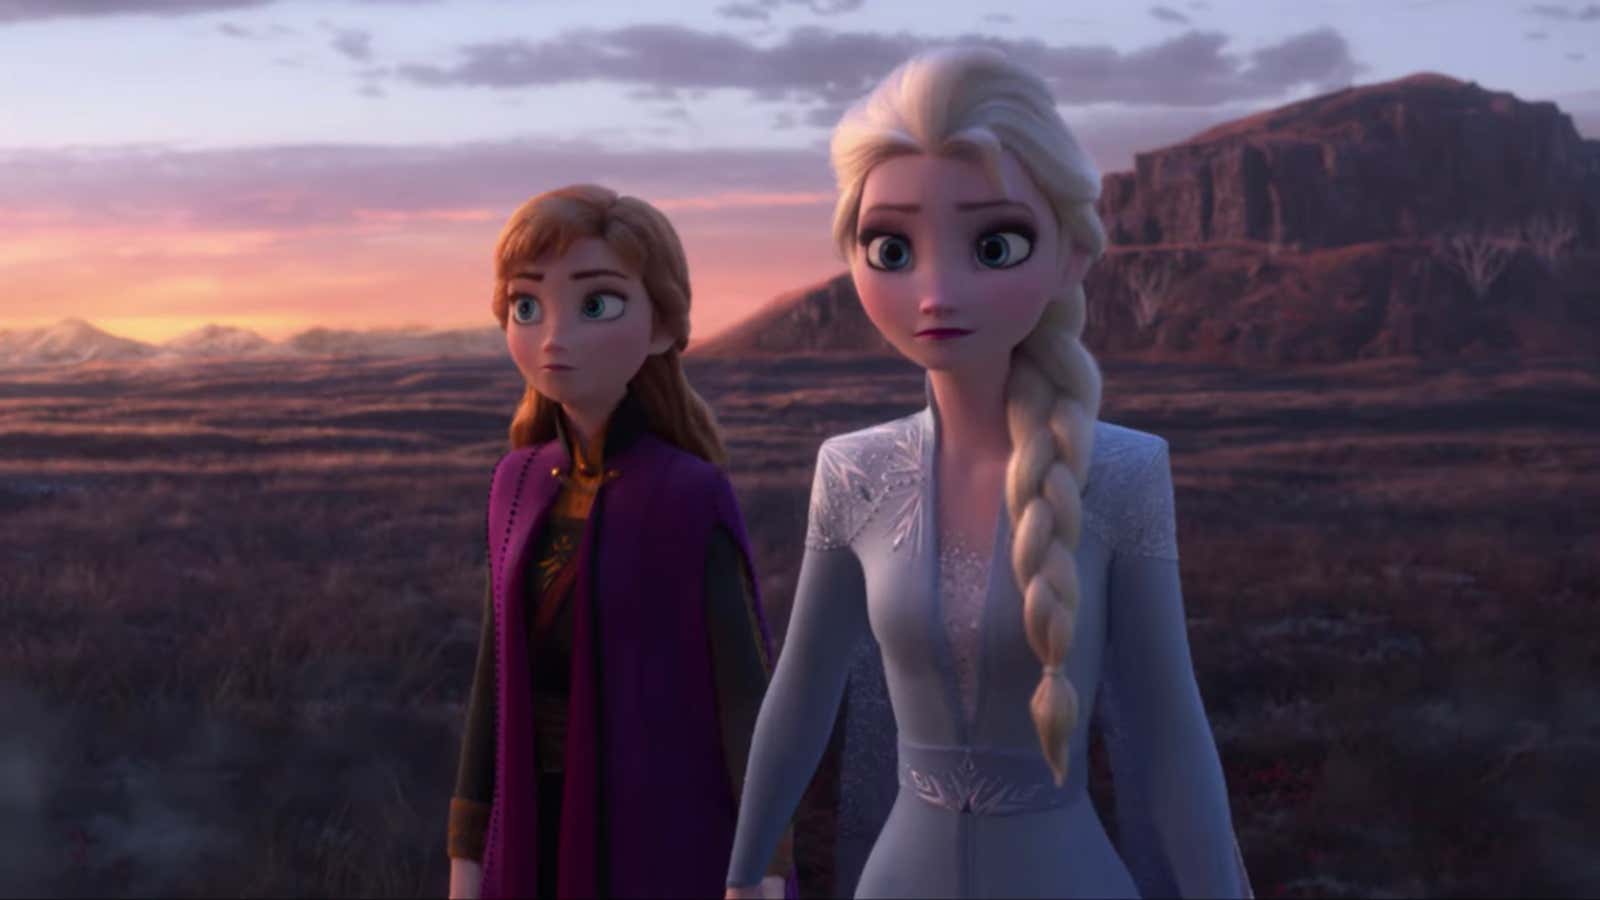 Frozen II is Disney’s newest addition to its long history of dark fairytales